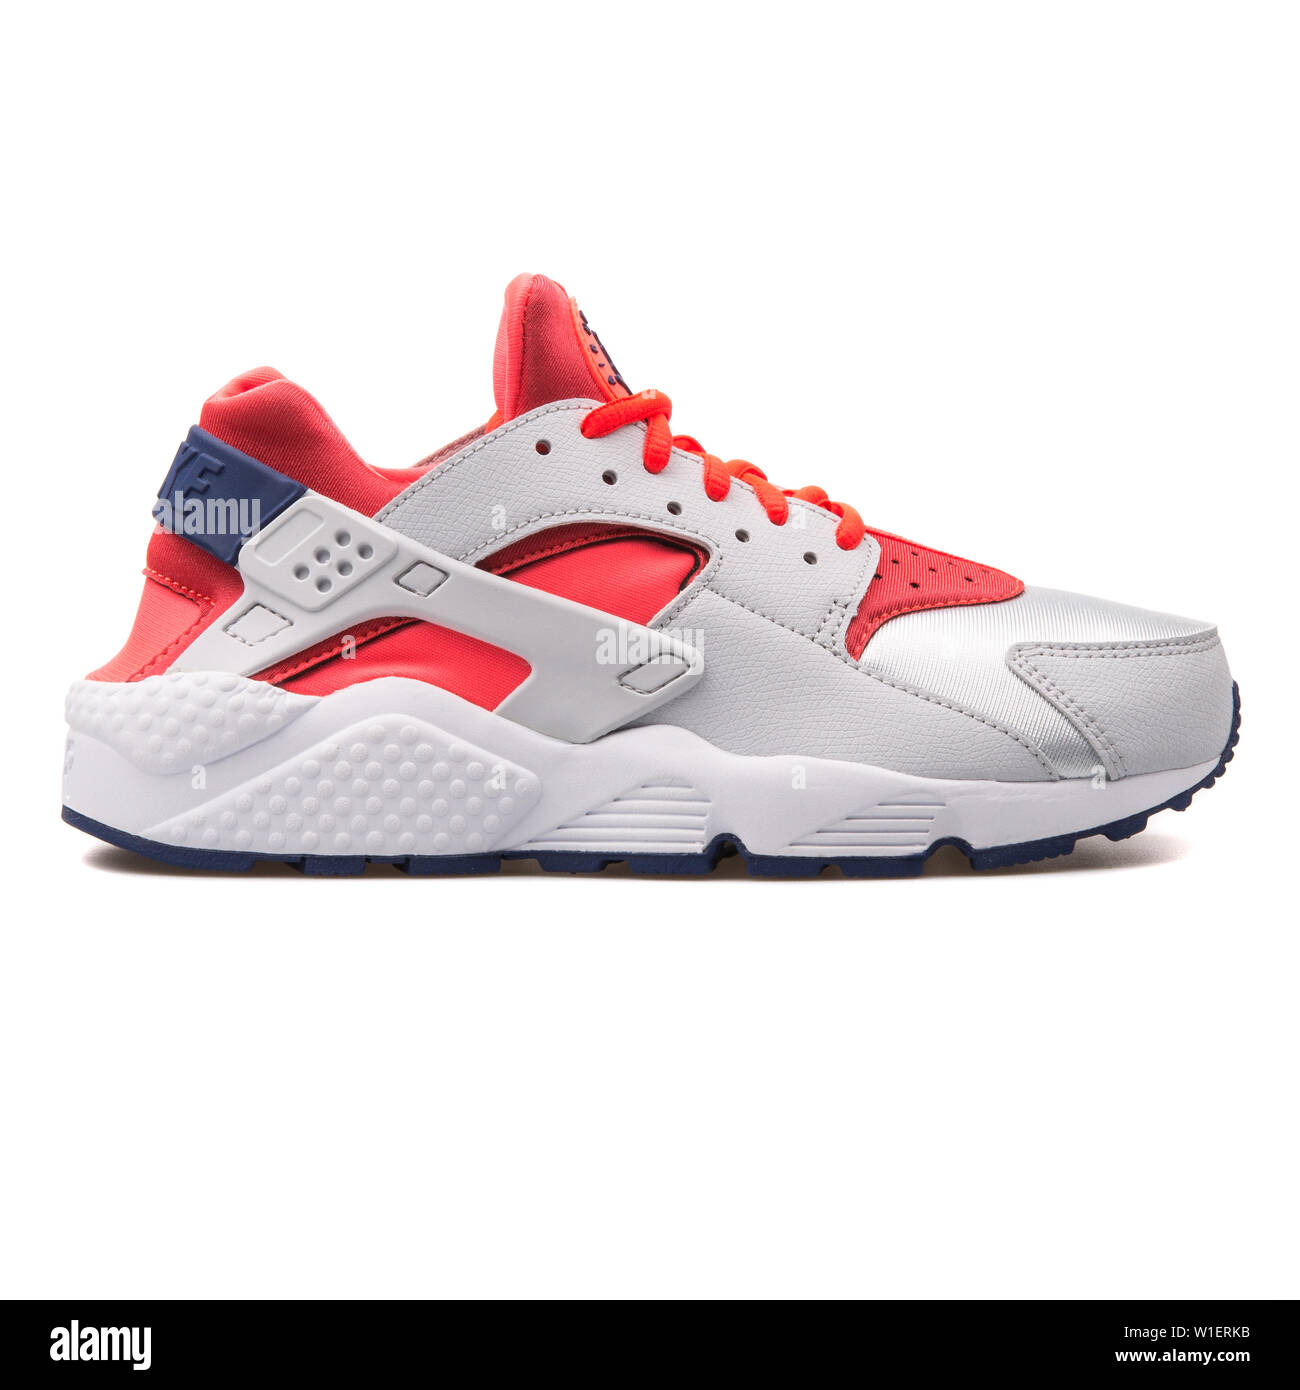 VIENNA, AUSTRIA - AUGUST 10, 2017: Nike Air Huarache Run grey and red  sneaker on white background Stock Photo - Alamy